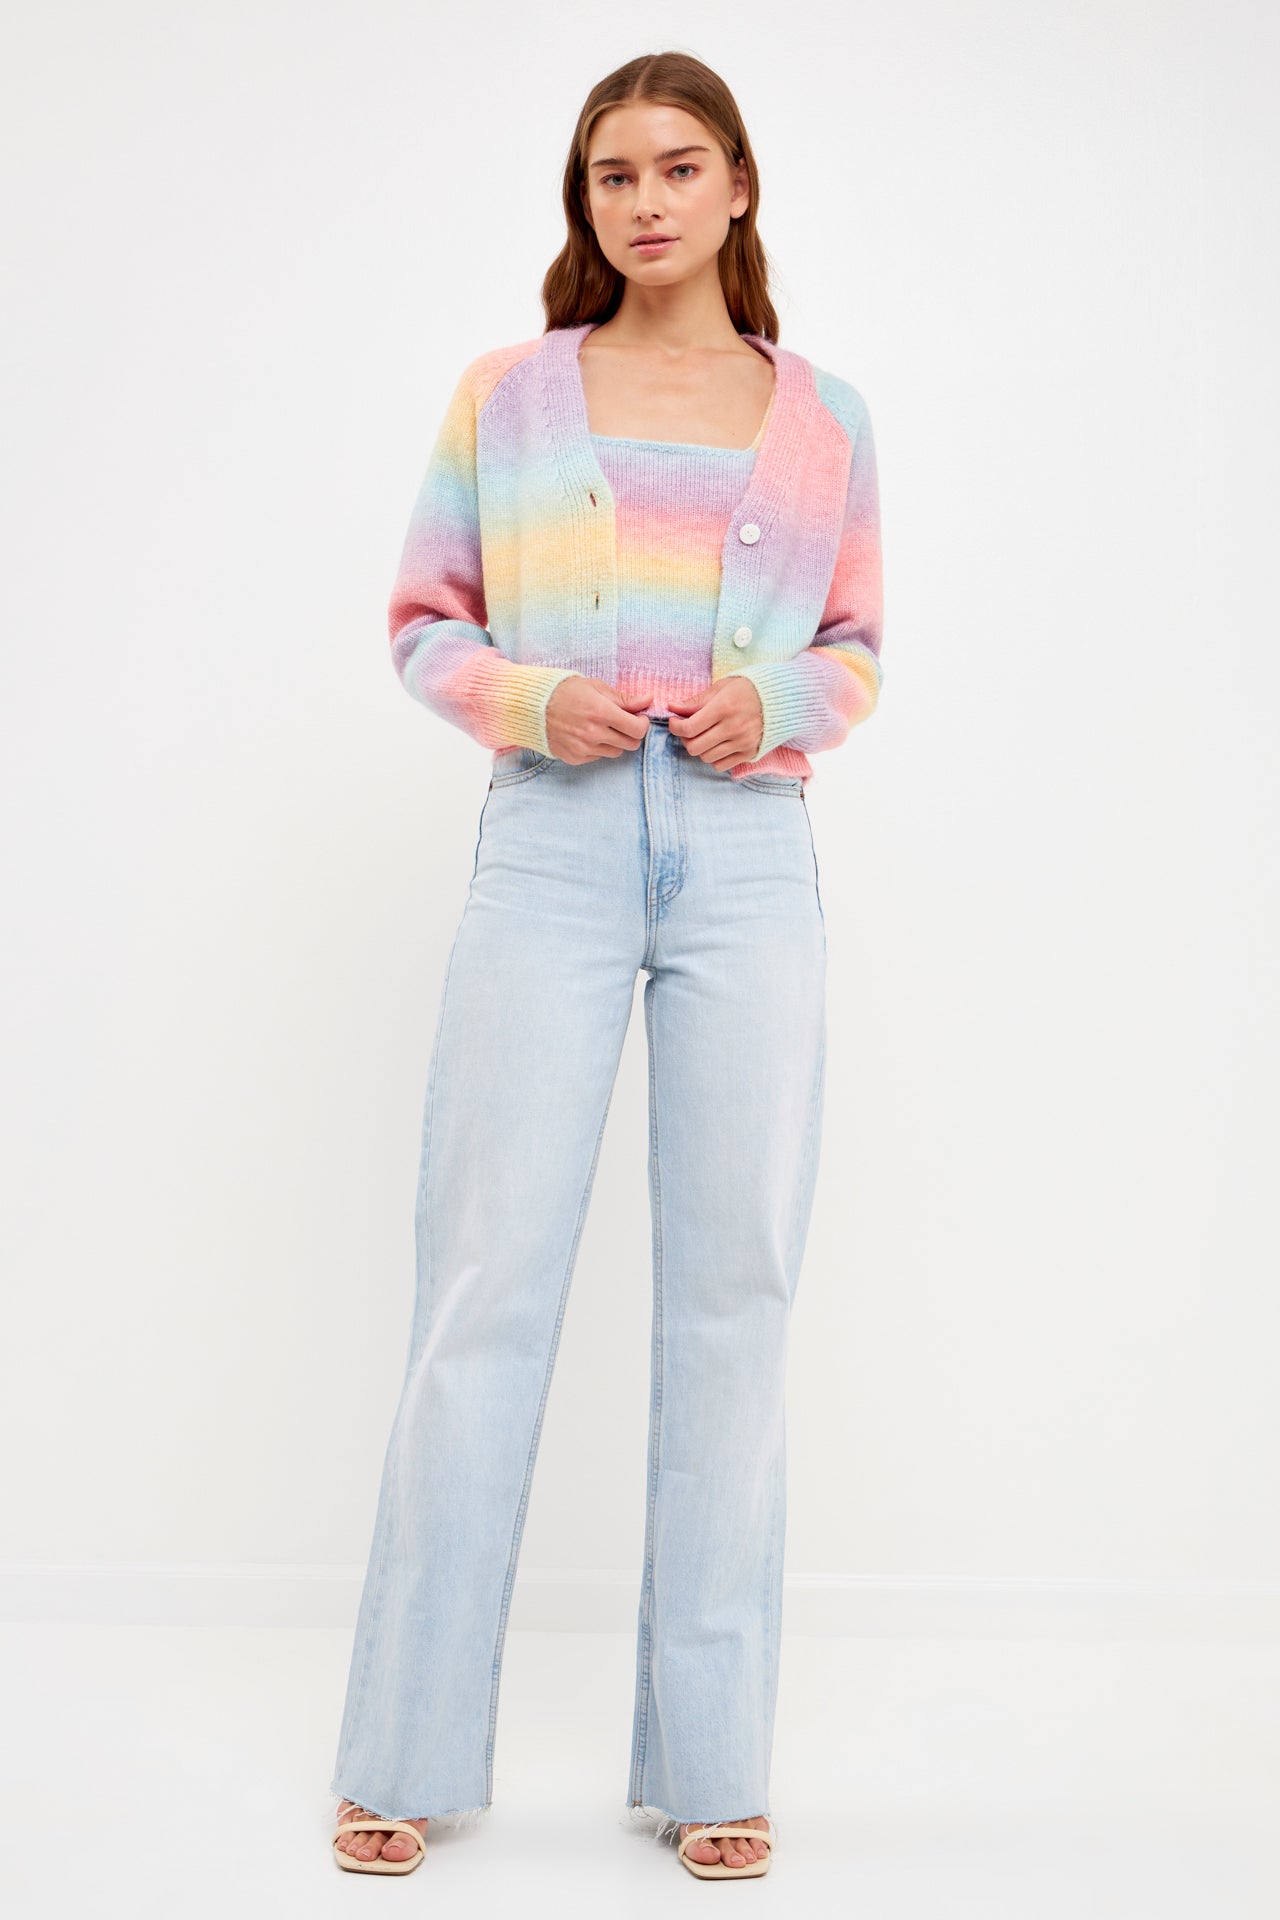 ENGLISH FACTORY - Multi-color Knit Cardigan - SWEATERS & KNITS available at Objectrare